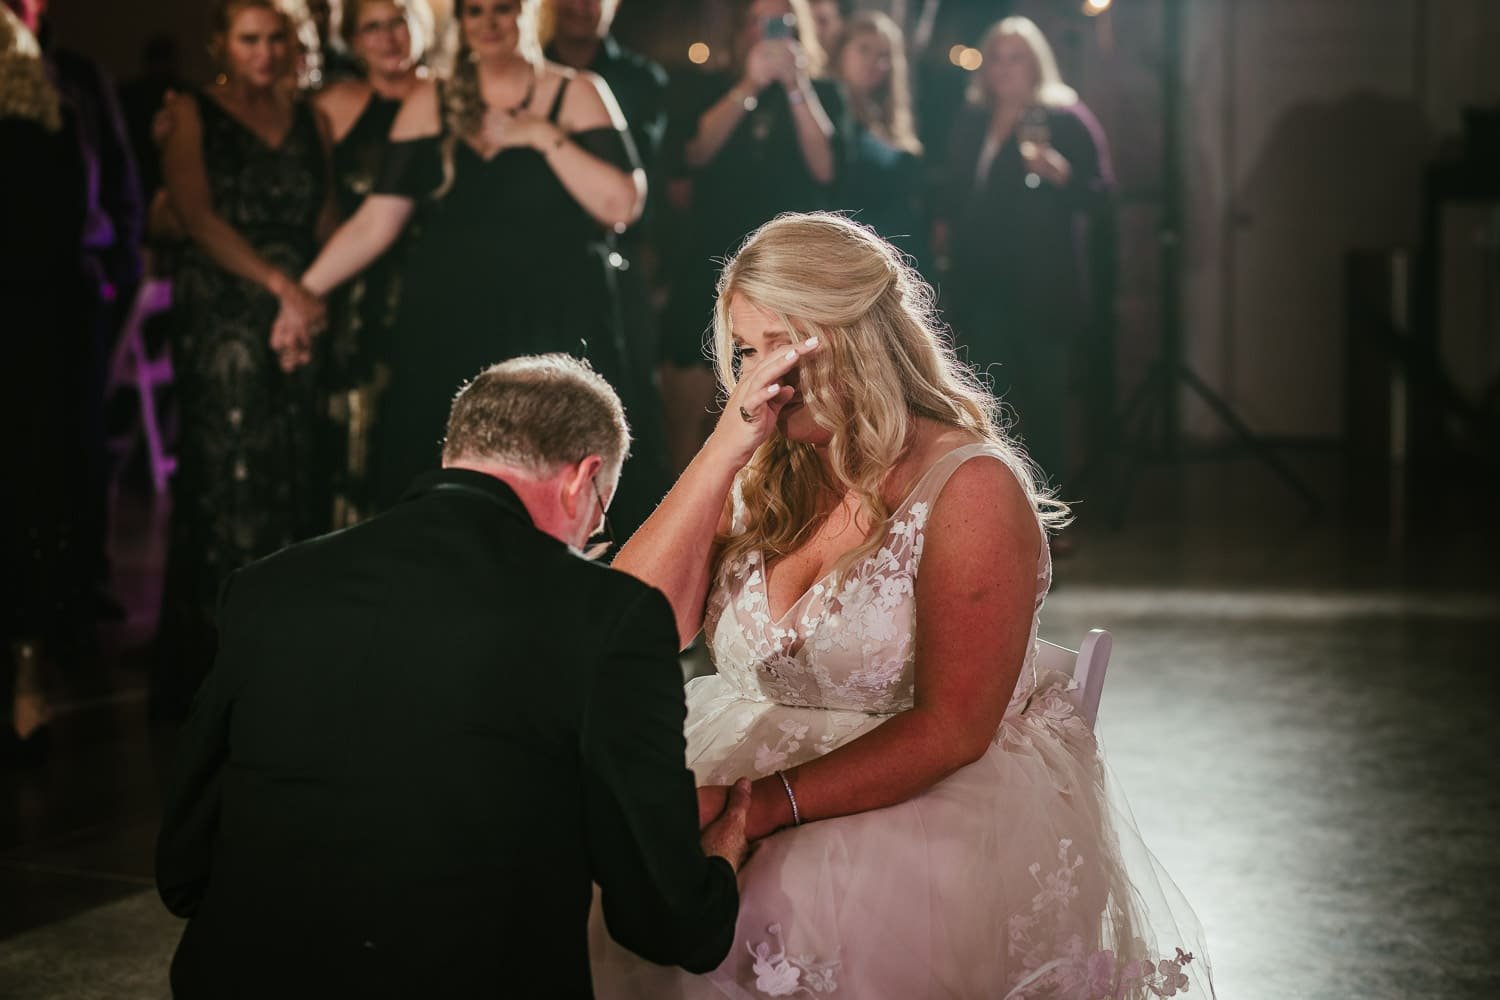 stlouisweddingphotographer that captures real emotion and candid momentsjpg.jpg